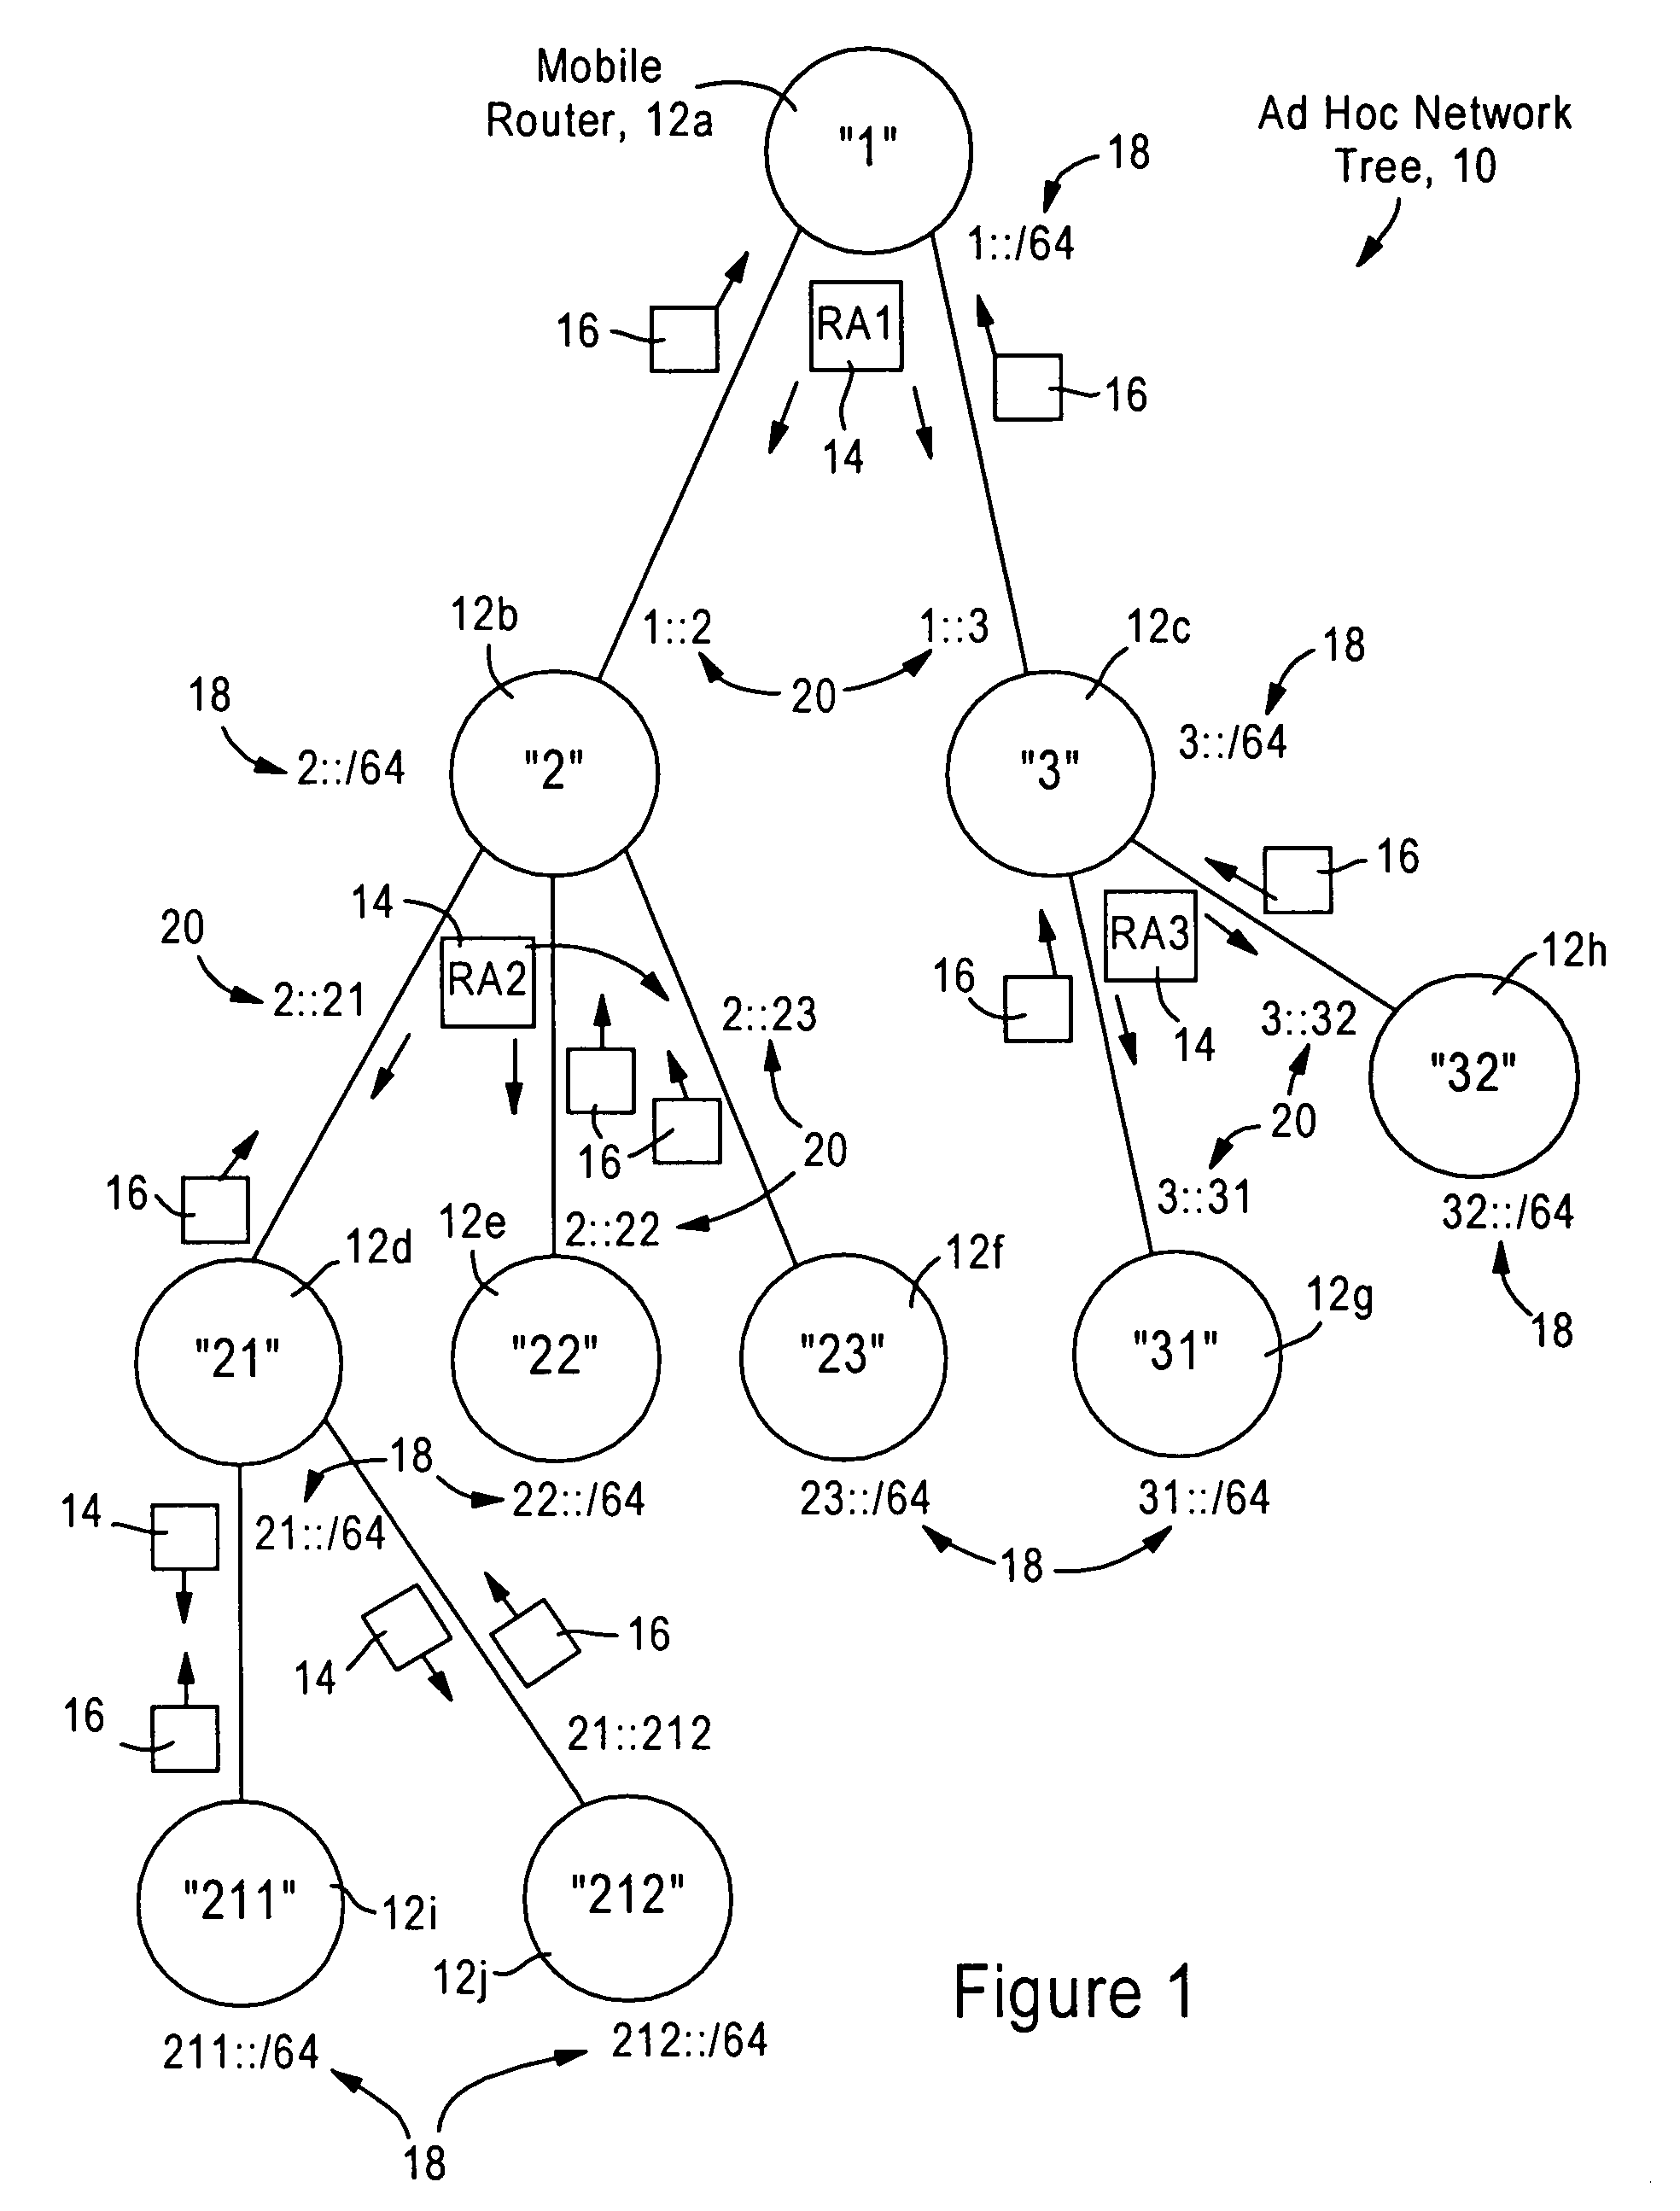 Arrangement for providing network prefix information from attached mobile routers to a clusterhead in a tree-based ad hoc mobile network